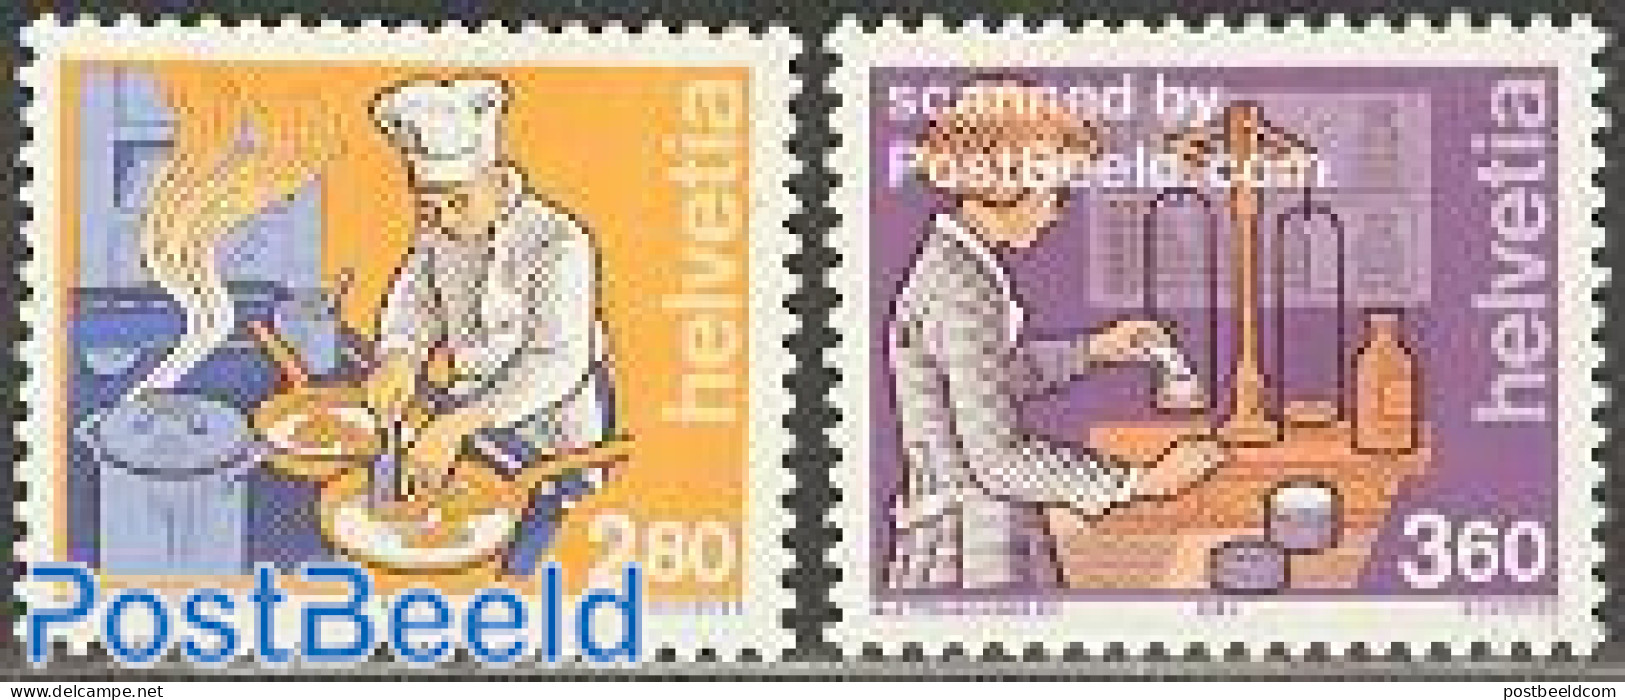 Switzerland 1992 Definitives, Professions 2v, Mint NH, Health - Science - Food & Drink - Health - Weights & Measures - Nuevos